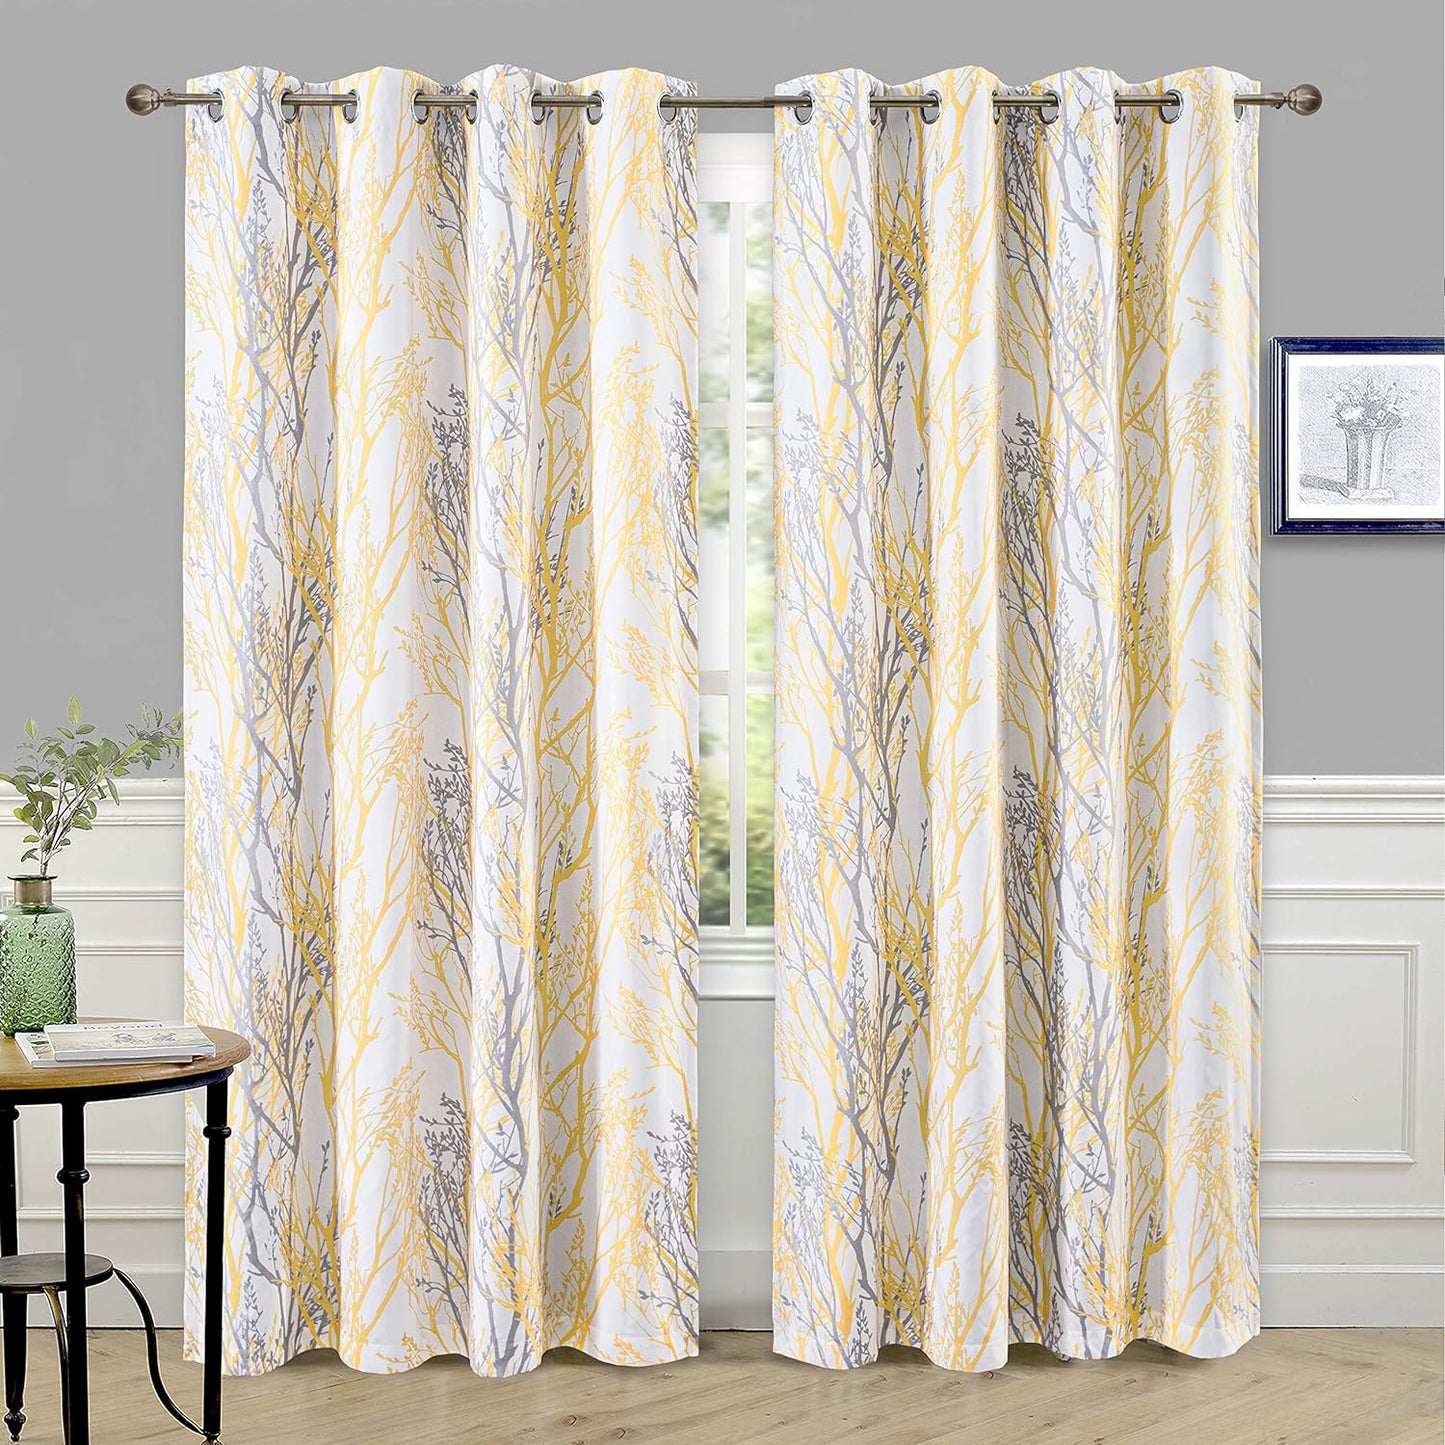 Driftaway Gray White Tree Branch Blackout Curtains for Bedroom Curtains 84 Inch Length 2 Panels Set Grey Branch Lined Window Treatment Thermal Grommet Top Curtain for Living Room Winter Warm Curtain  DriftAway Tree Branch-Yellow 52"X84" 